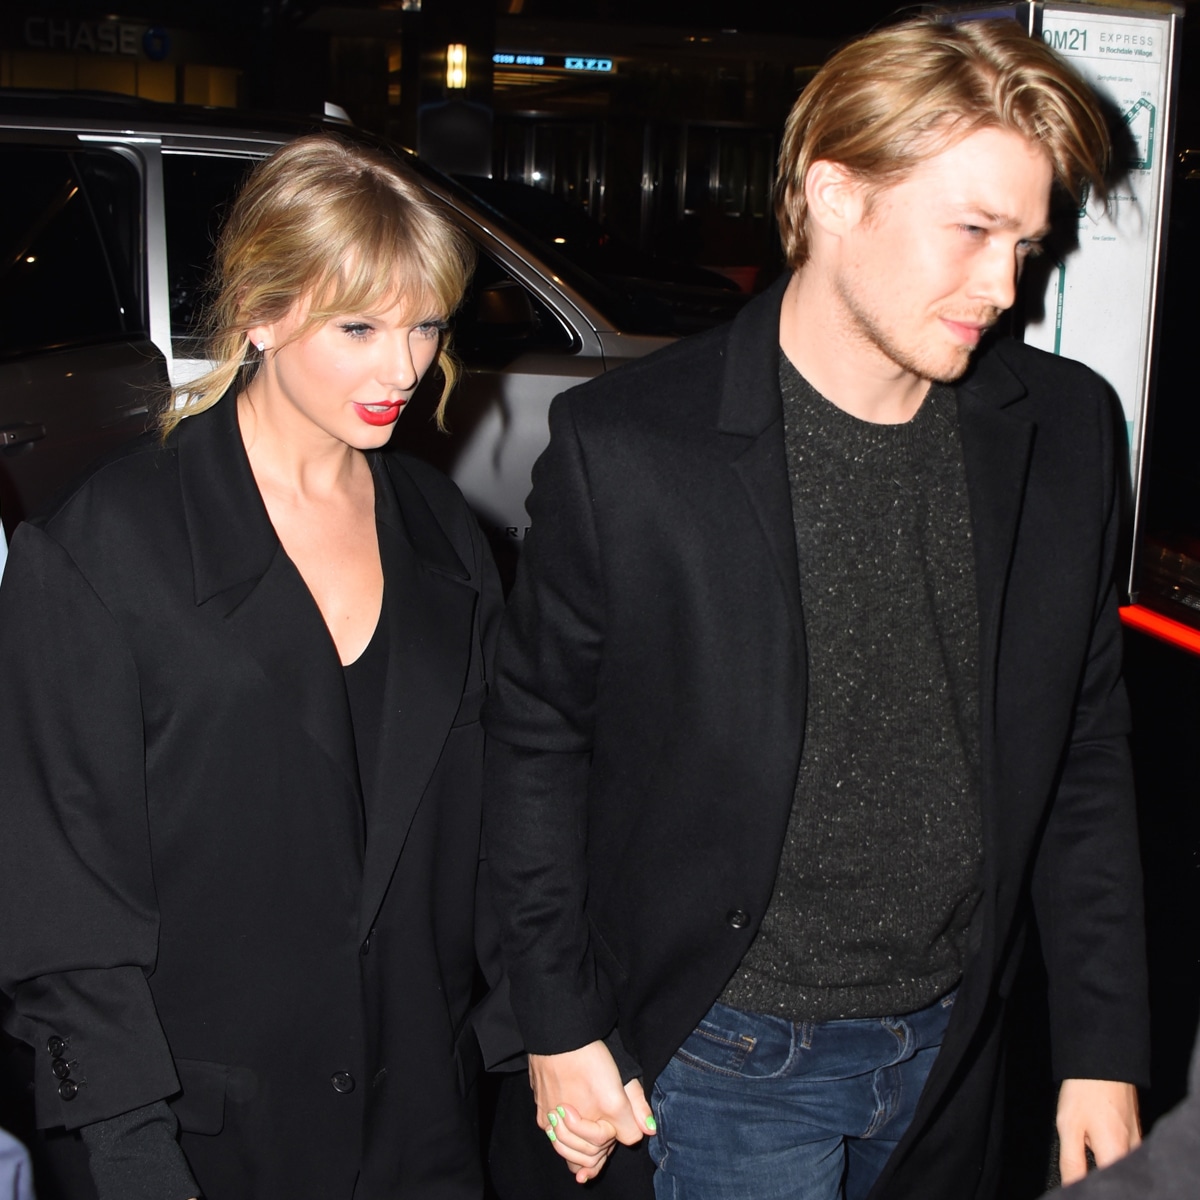 Joe Alwyn Reveals Why He and Taylor Swift Keep Their Romance Private - E! Online